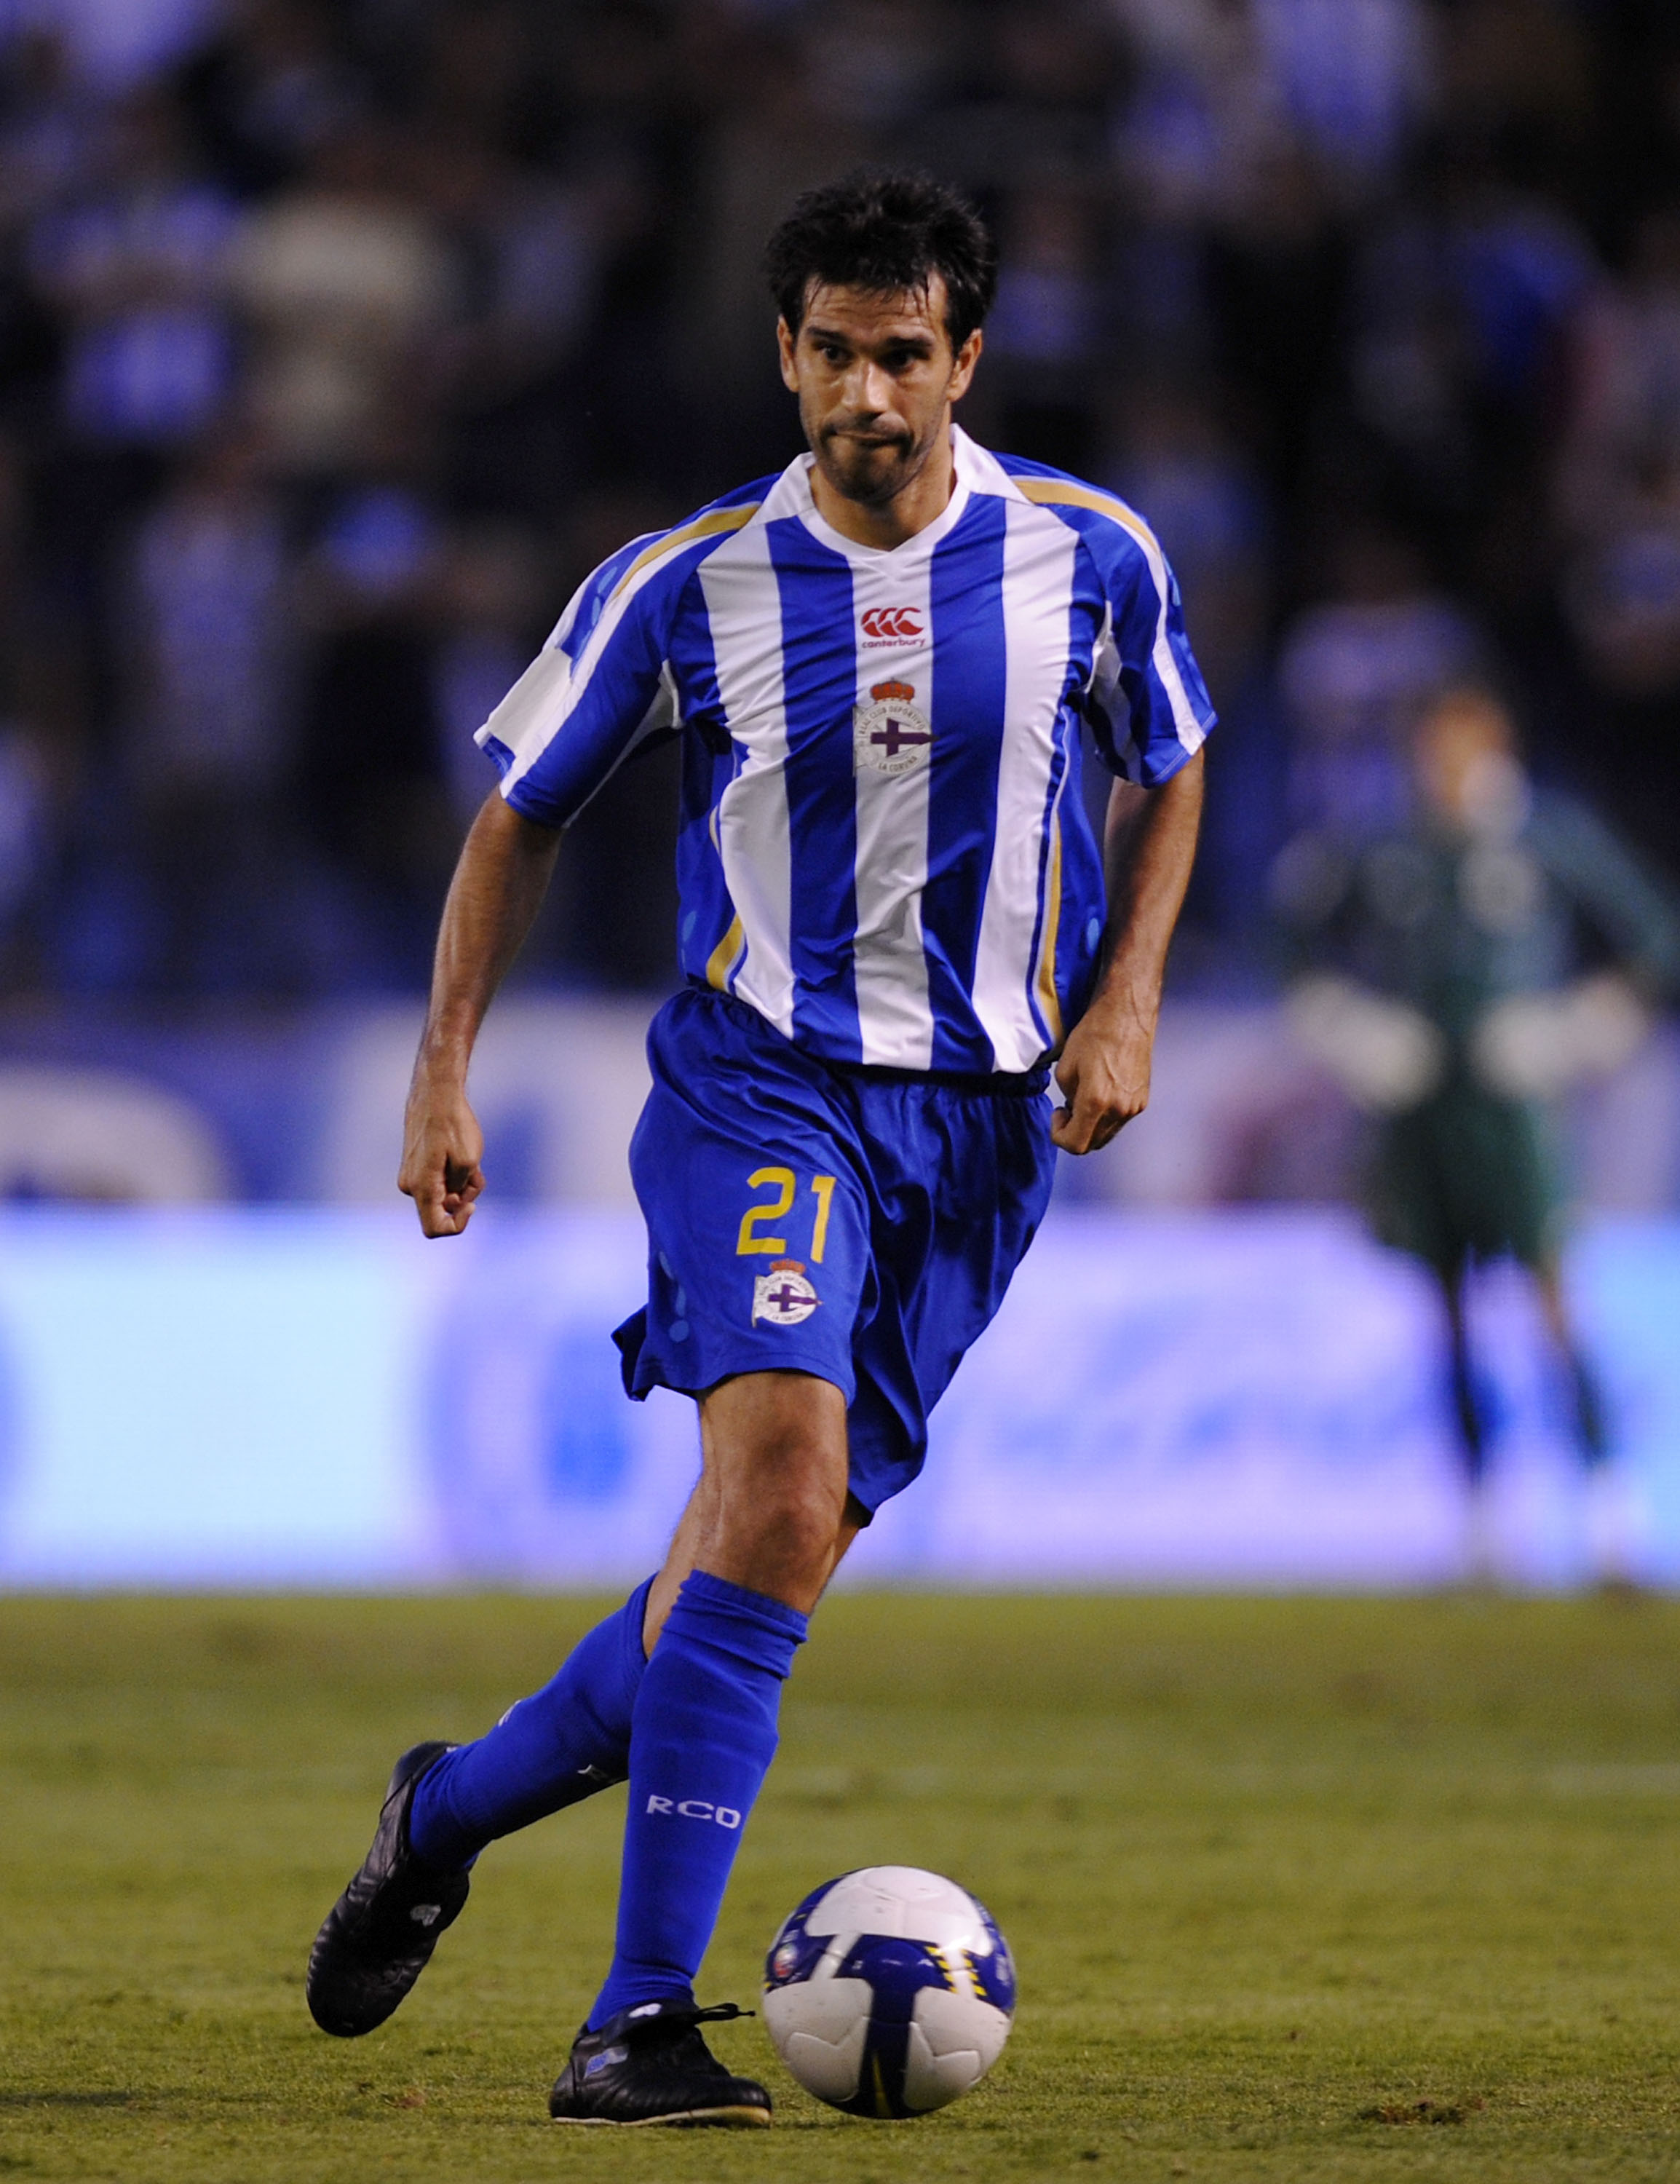 A CORUNA, SPAIN - AUGUST 14:  Juan Carlos Valeron of Deportivo La Coruna goes for the ball during the UEFA Cup Second Qualifying Round, first leg between Deportivo La Coruna and Hadjuk Split at the Riazor stadium on August 14, 2008 in A Coruna, Spain.  (P